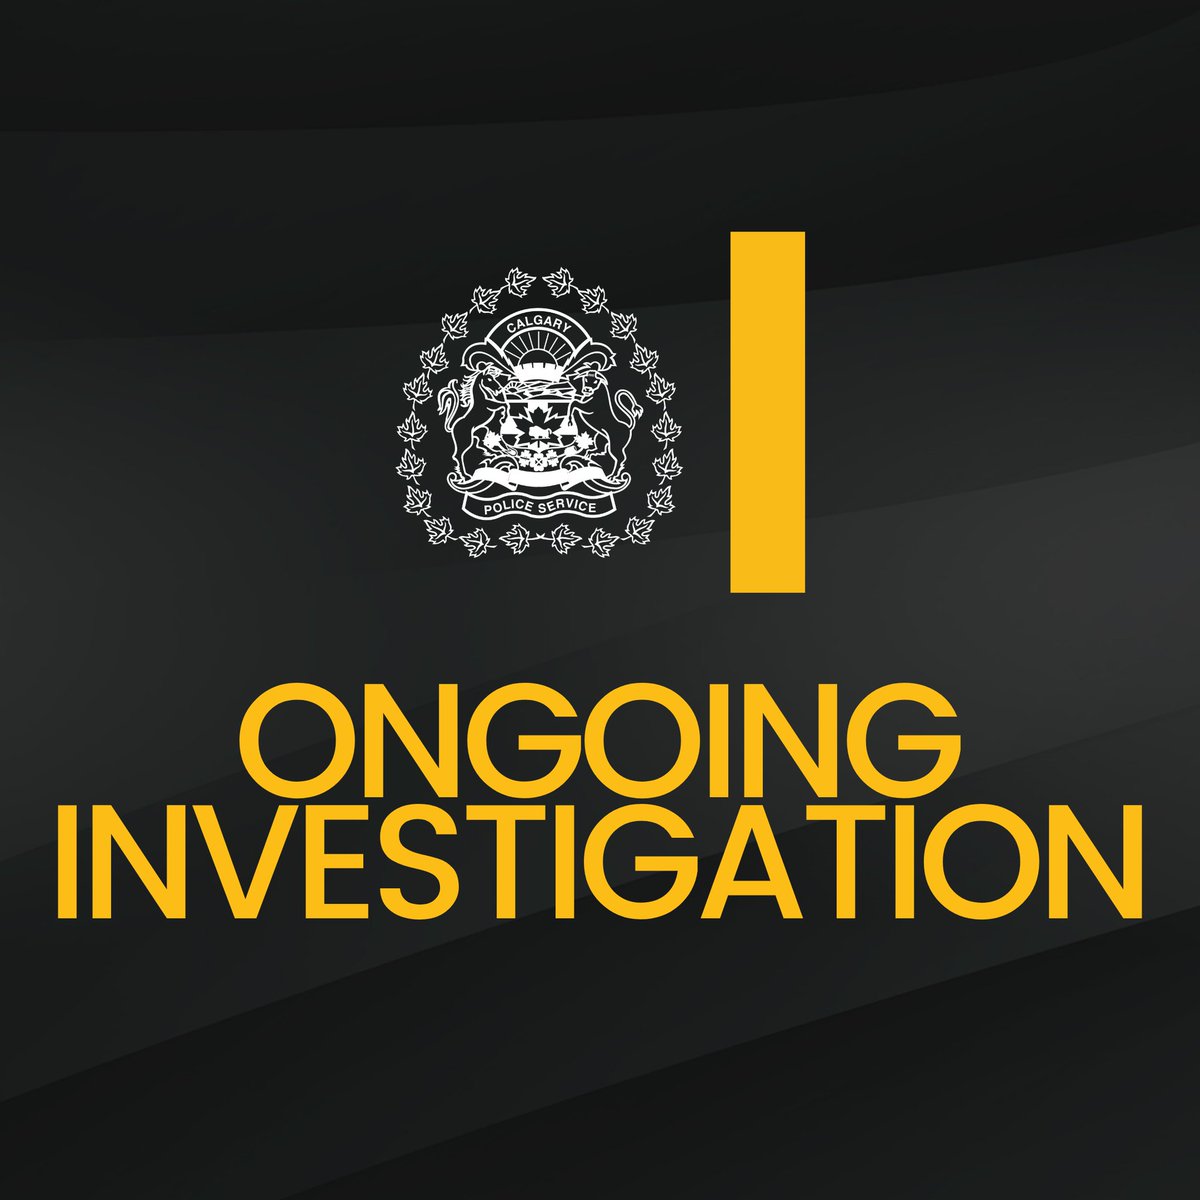 🔵 ONGOING INVESTIGATION 🔵 We're on scene investigating a suspicious death in Redstone. At approx. 9:20 a.m. today, we were called to a residence in the 100 block of Redstone Common N.E., for reports of a woman in medical distress; she was declared deceased at the scene. One